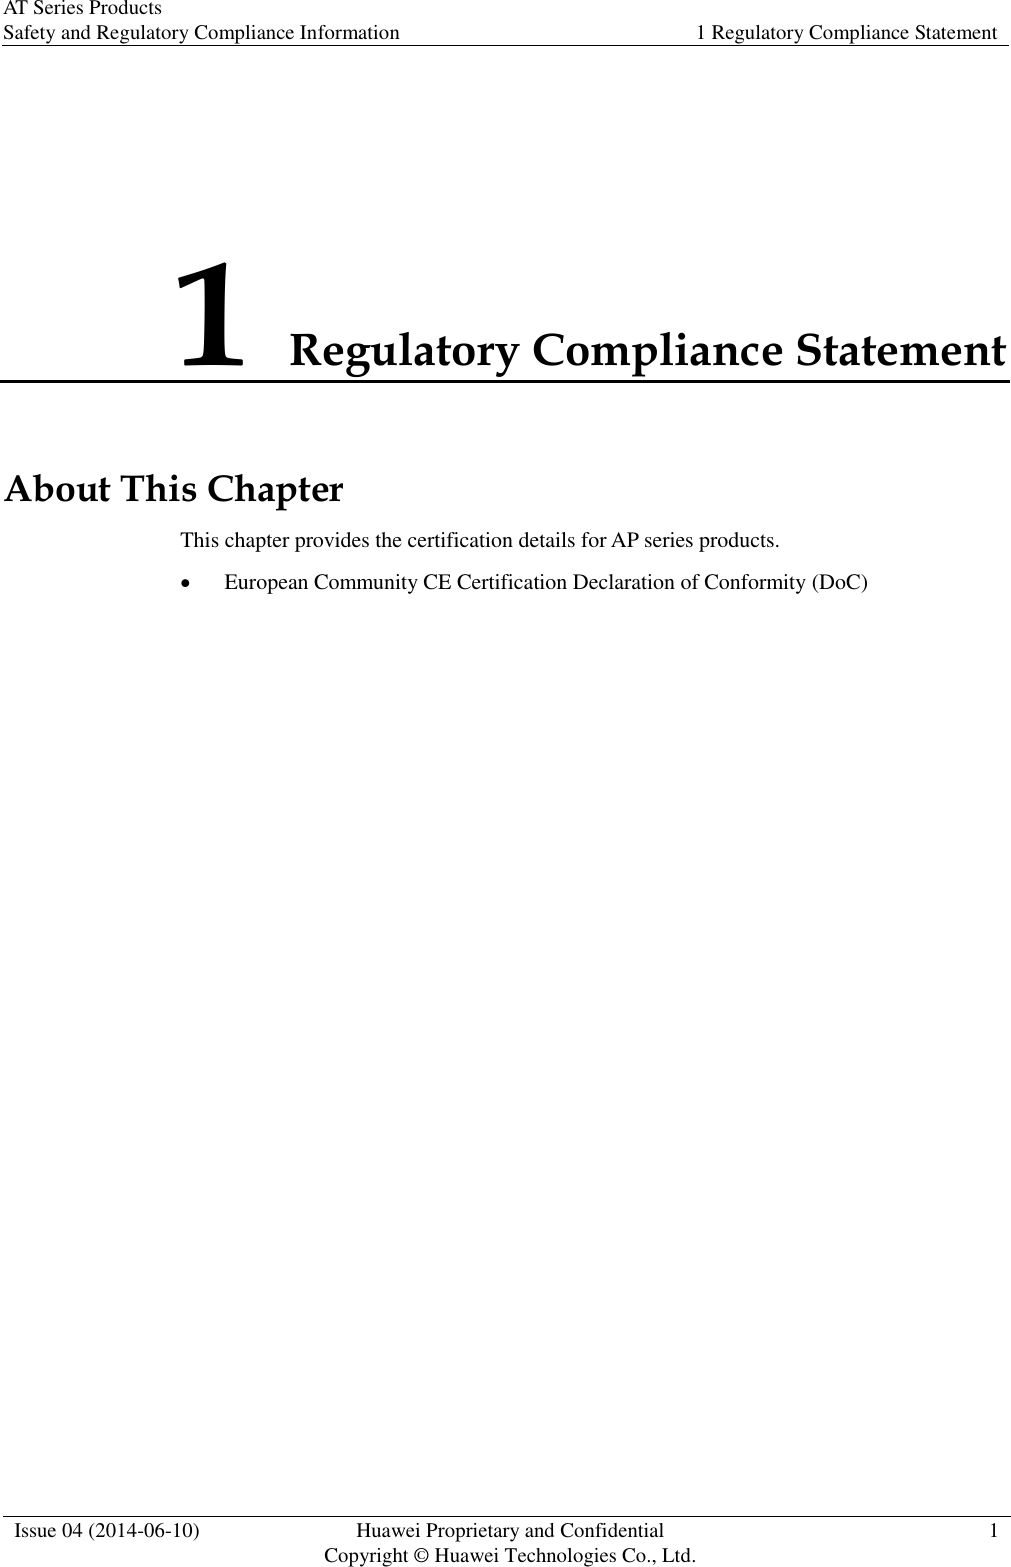 AT Series Products Safety and Regulatory Compliance Information 1 Regulatory Compliance Statement  Issue 04 (2014-06-10) Huawei Proprietary and Confidential           Copyright © Huawei Technologies Co., Ltd. 1  1 Regulatory Compliance Statement About This Chapter This chapter provides the certification details for AP series products.  European Community CE Certification Declaration of Conformity (DoC)  